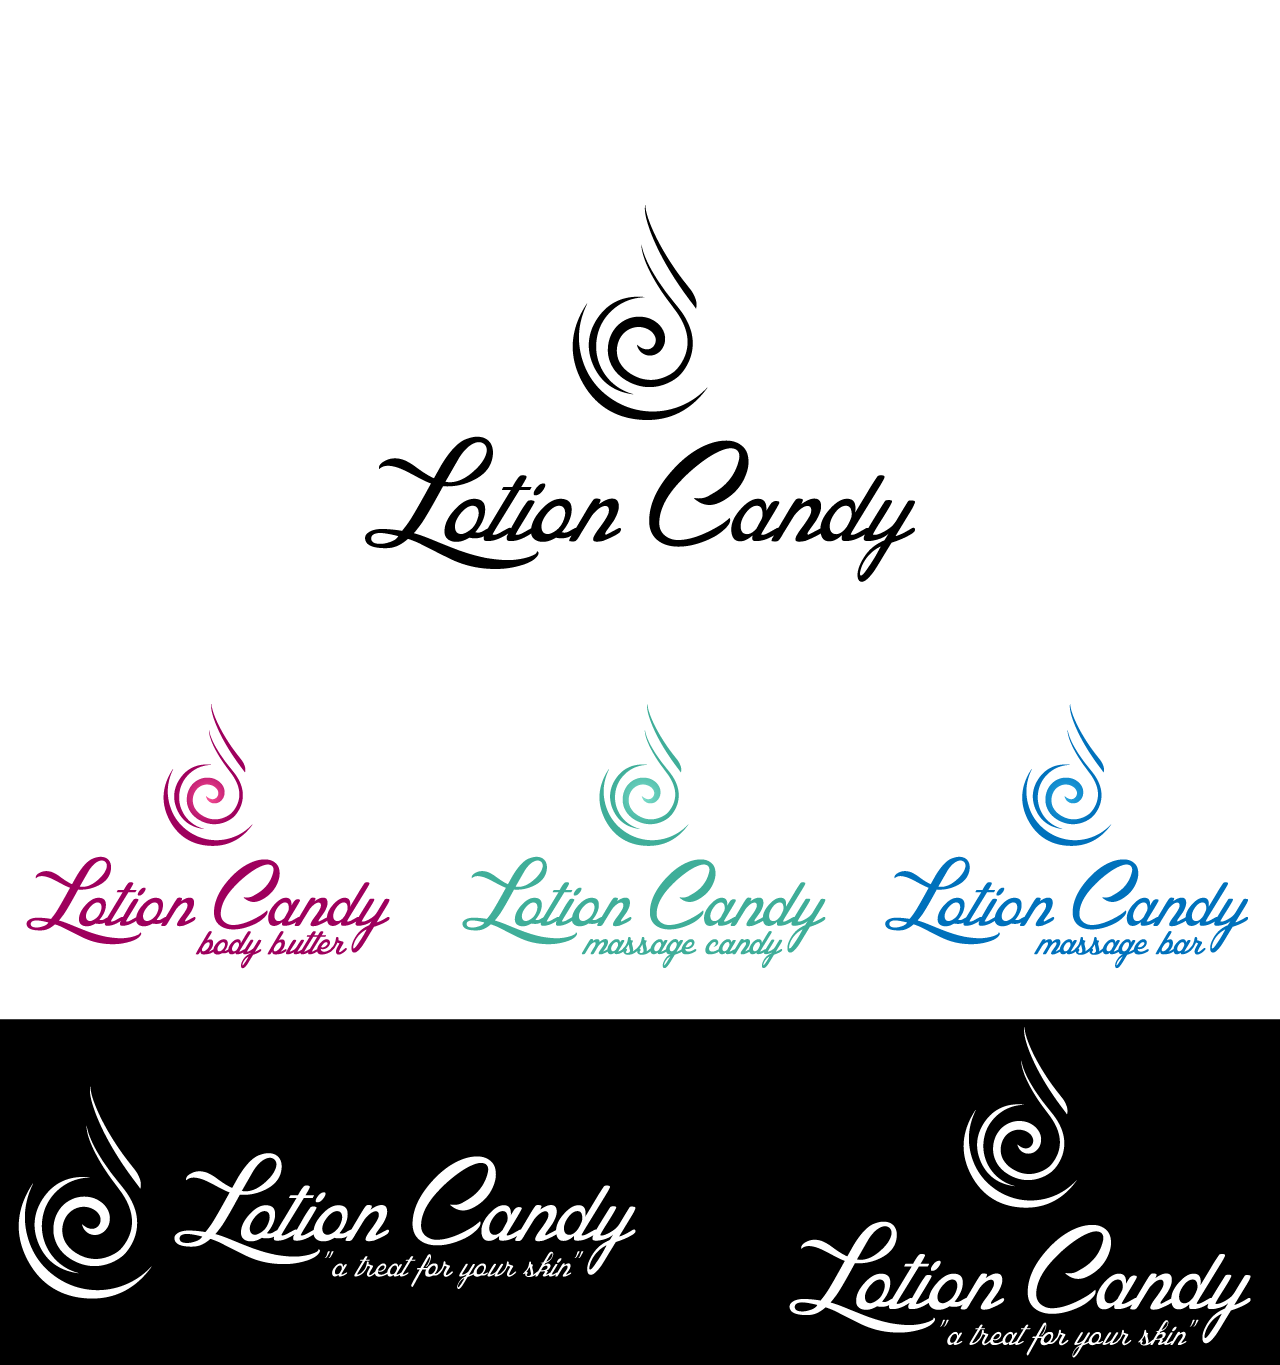 Lotion Logo - Logo Design. 'Lotion Candy a treat for your skin' design